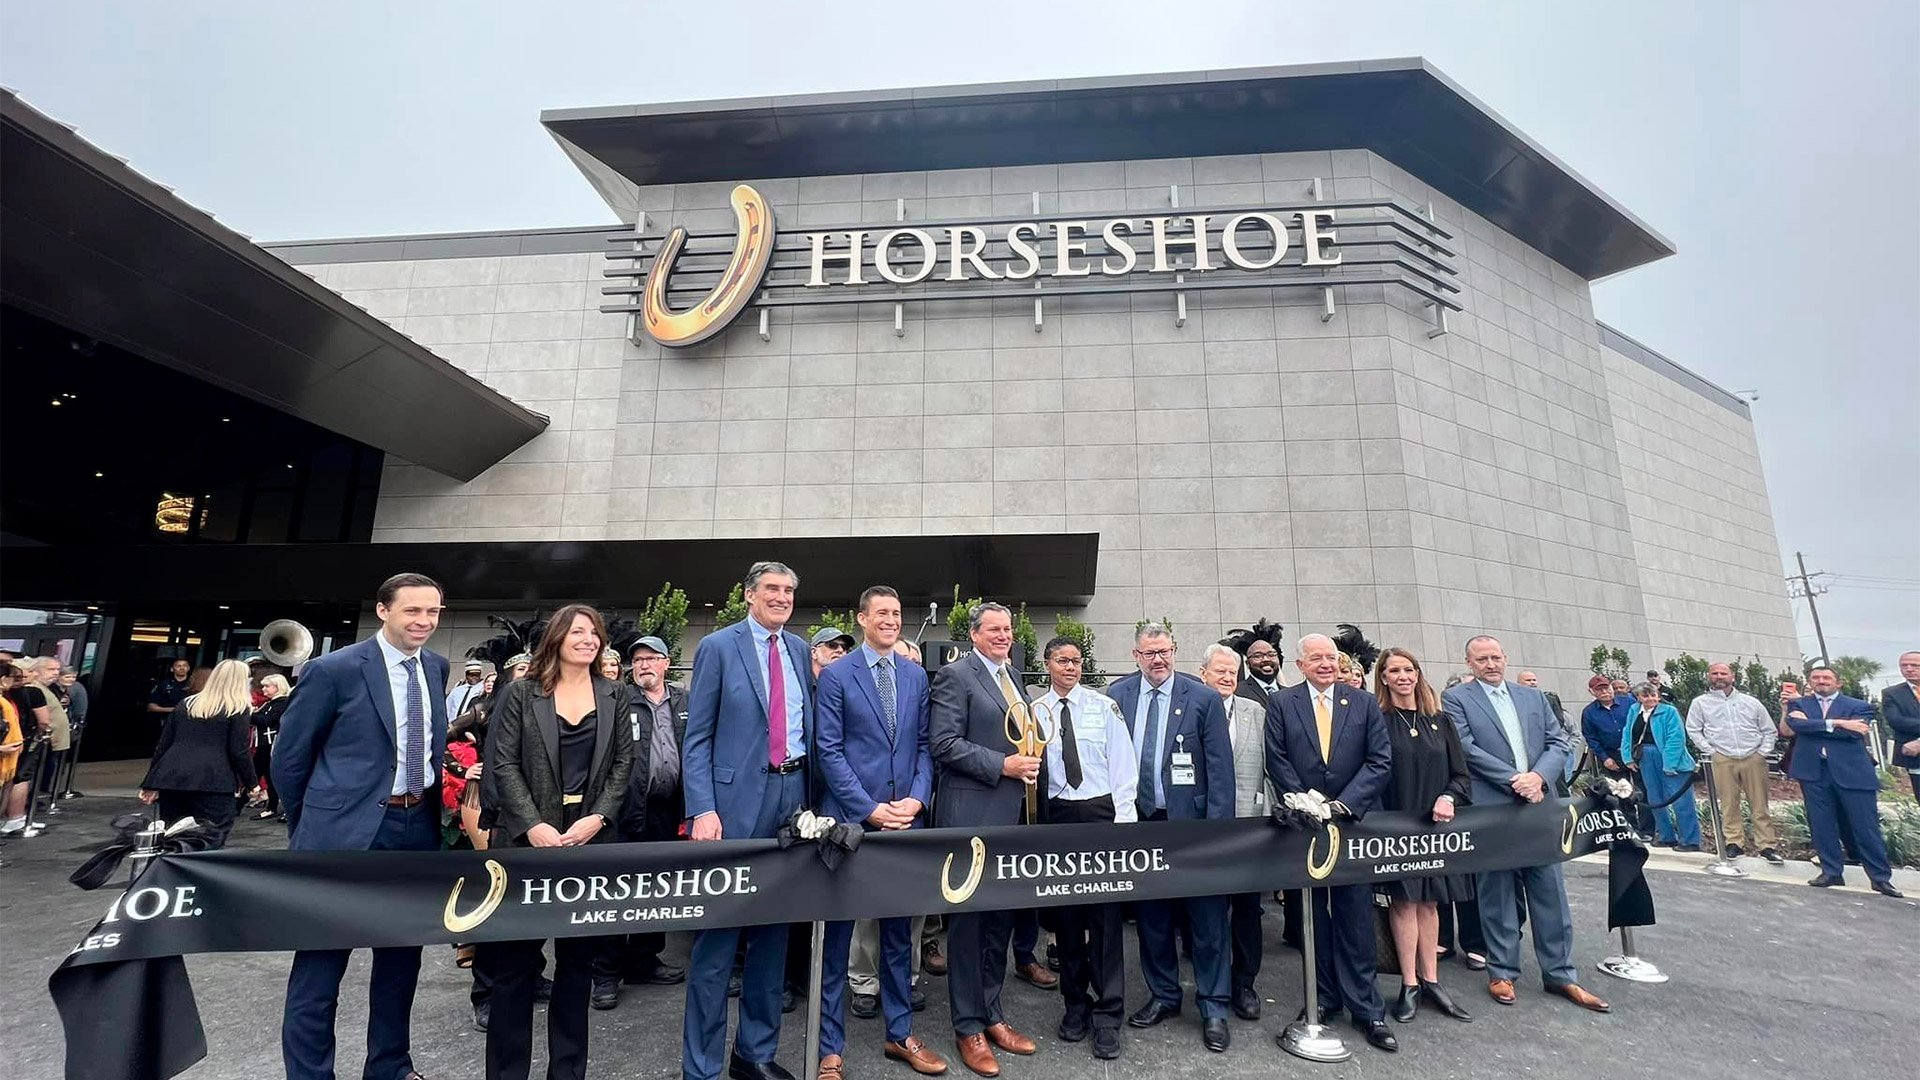 Horseshoe still finding place in crowded market